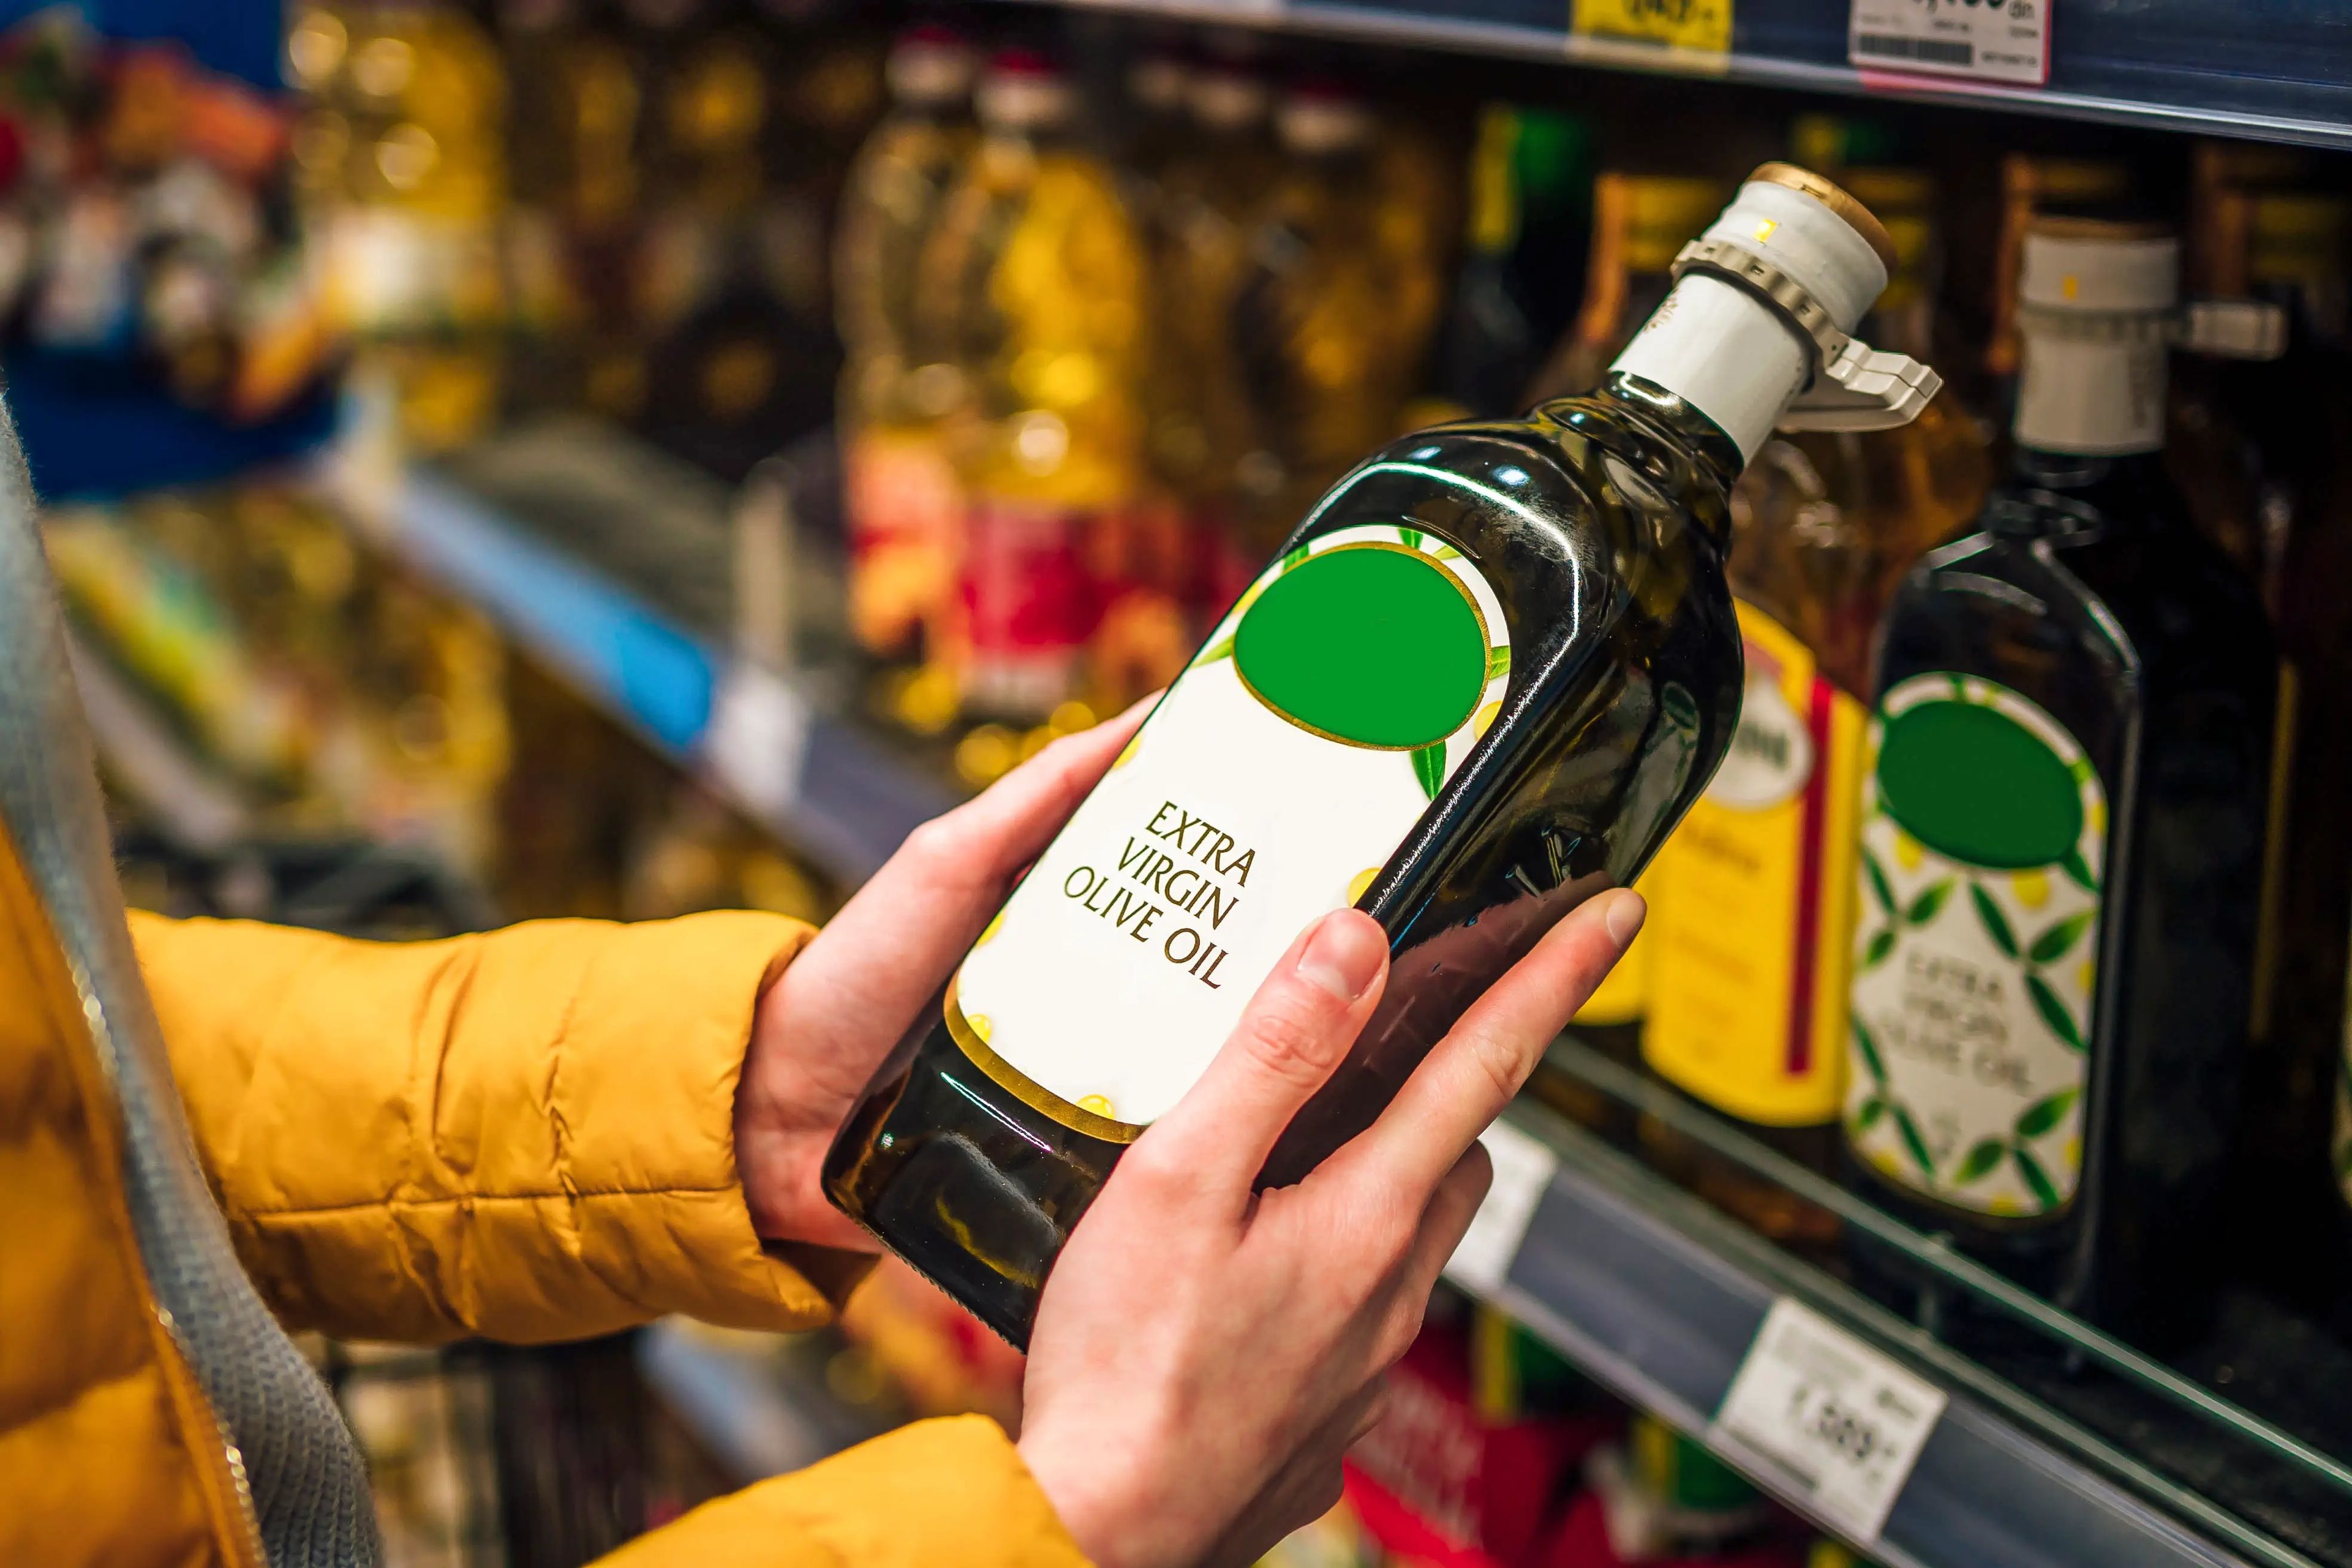 A woman chooses a bottle of extra virgin olive oil from a supermarket shelf